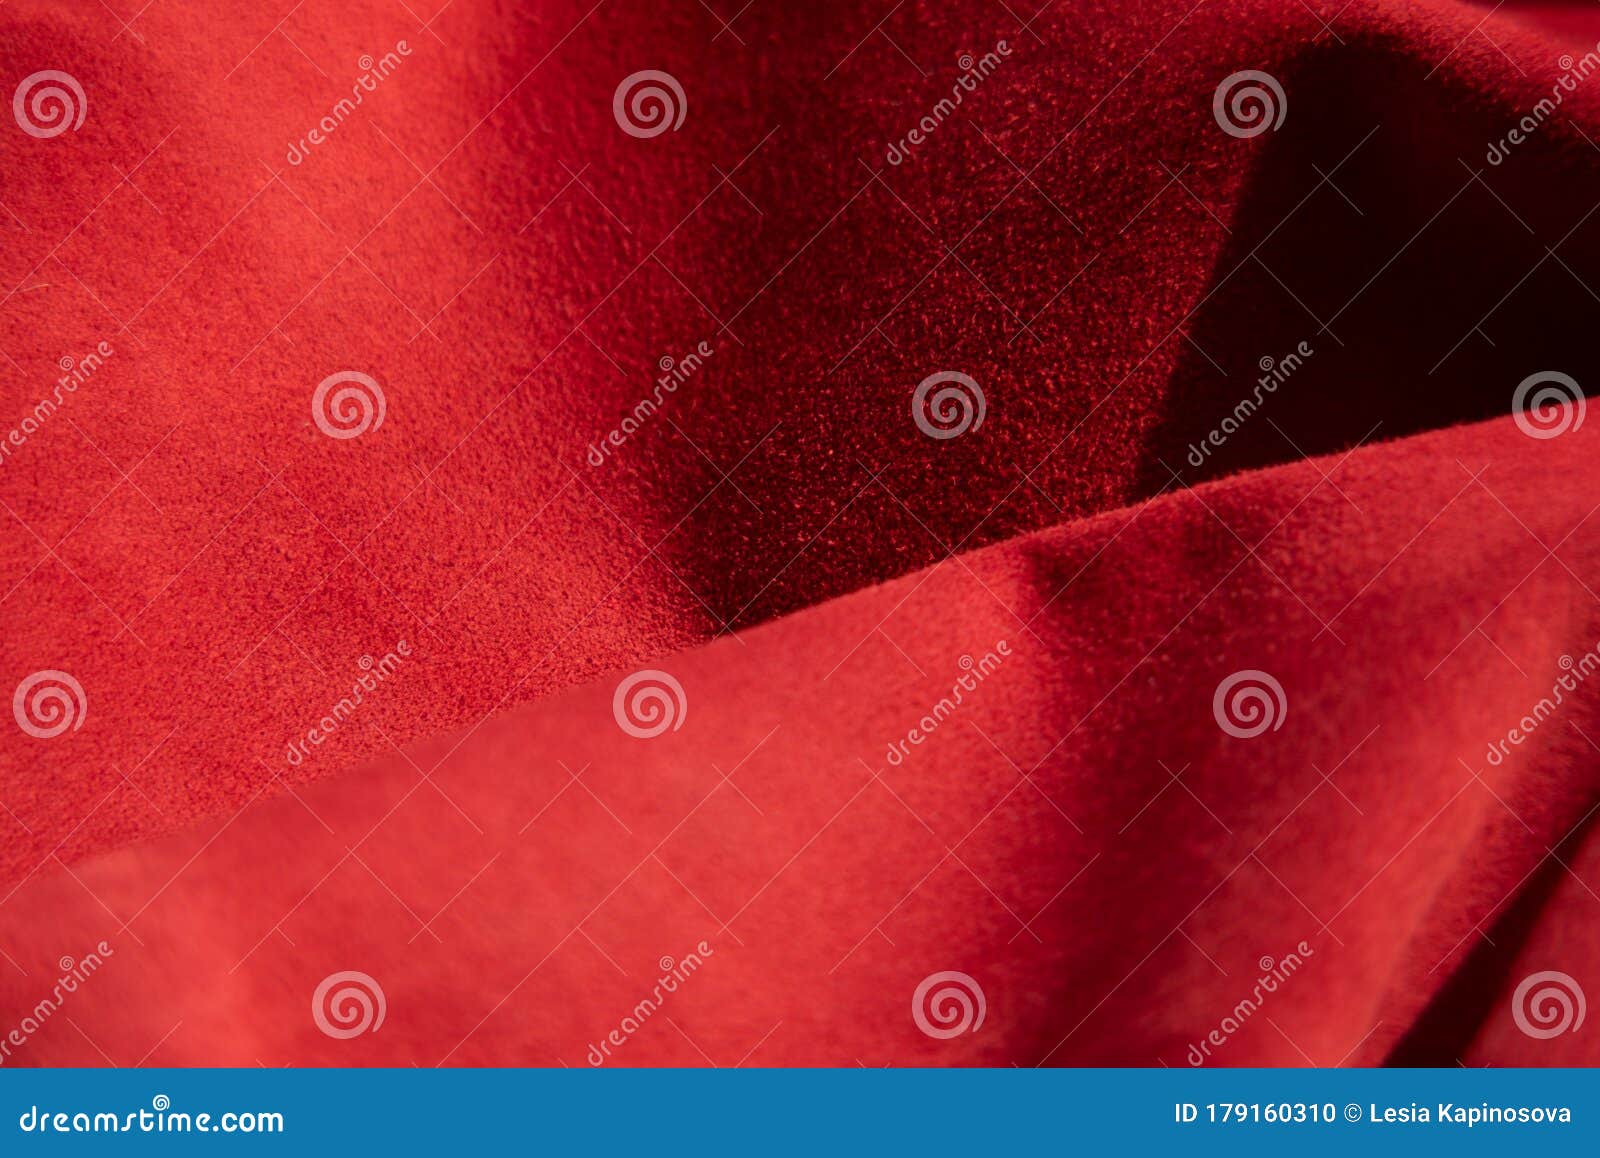 dark red matte background of suede fabric, closeup. velvet texture of seamless wine leather. felt material macro.